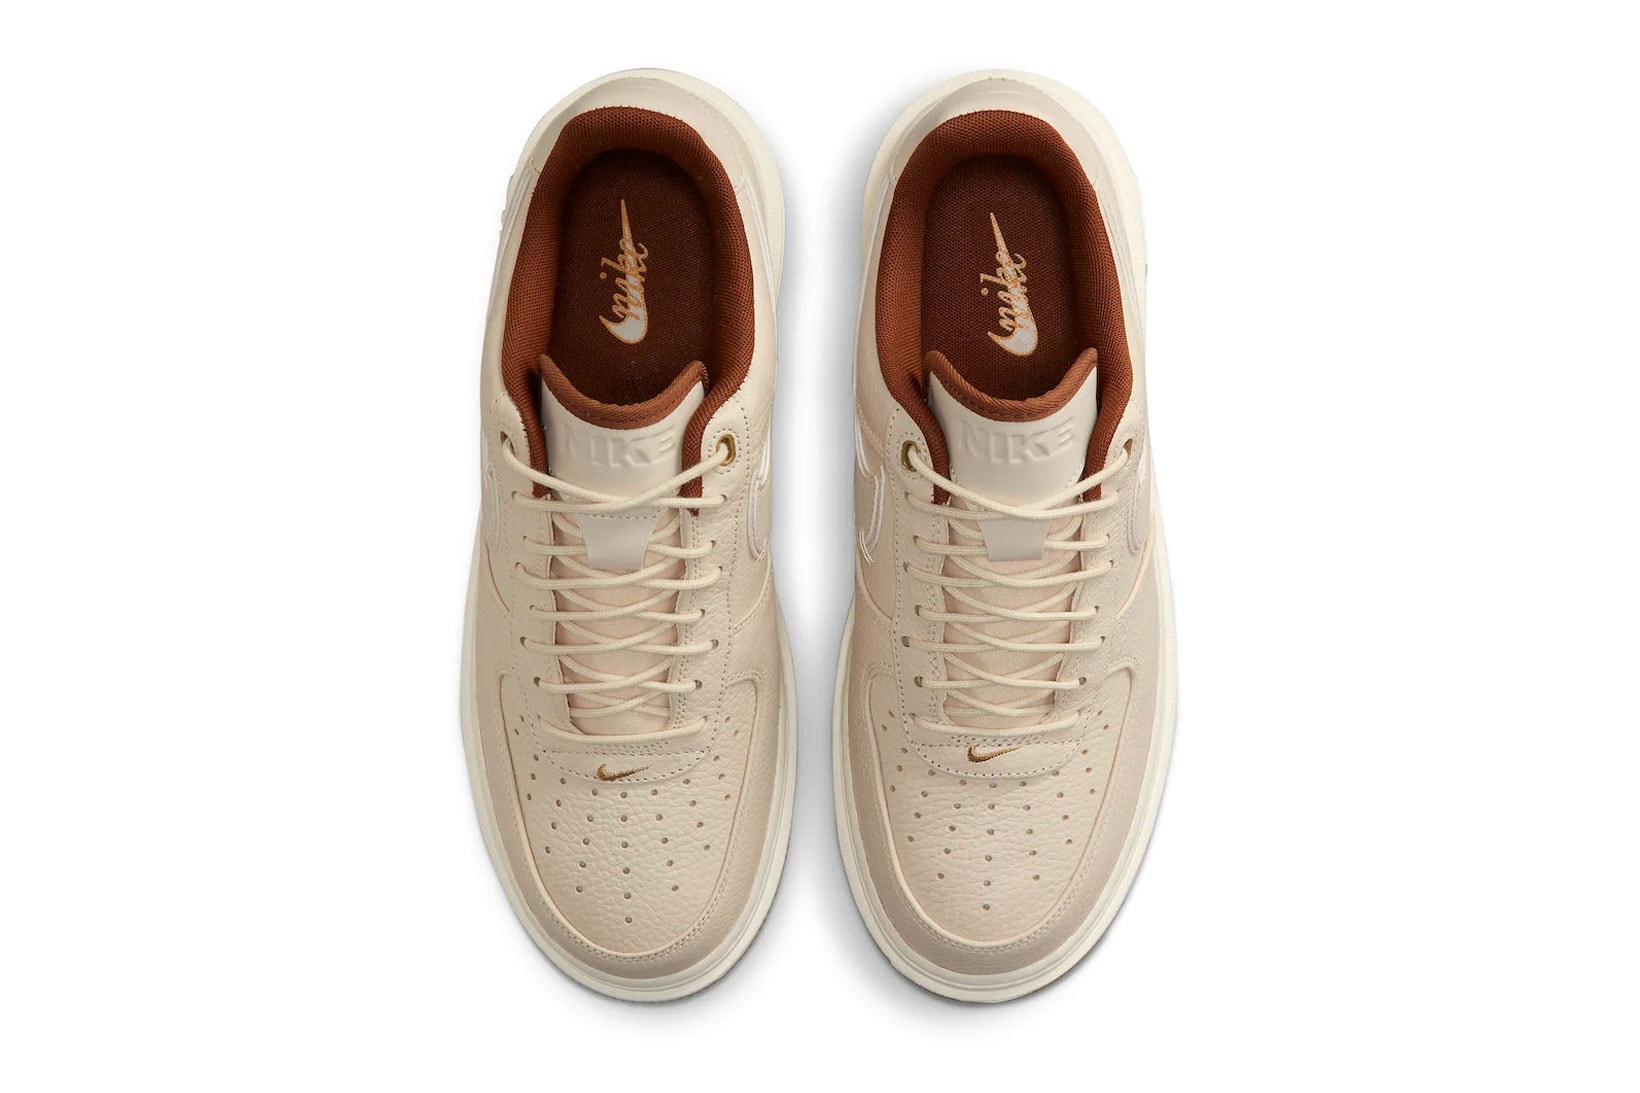 Nike Air Force 1 AF1 Luxe Pecan Gum Upper Shoelaces Tongue